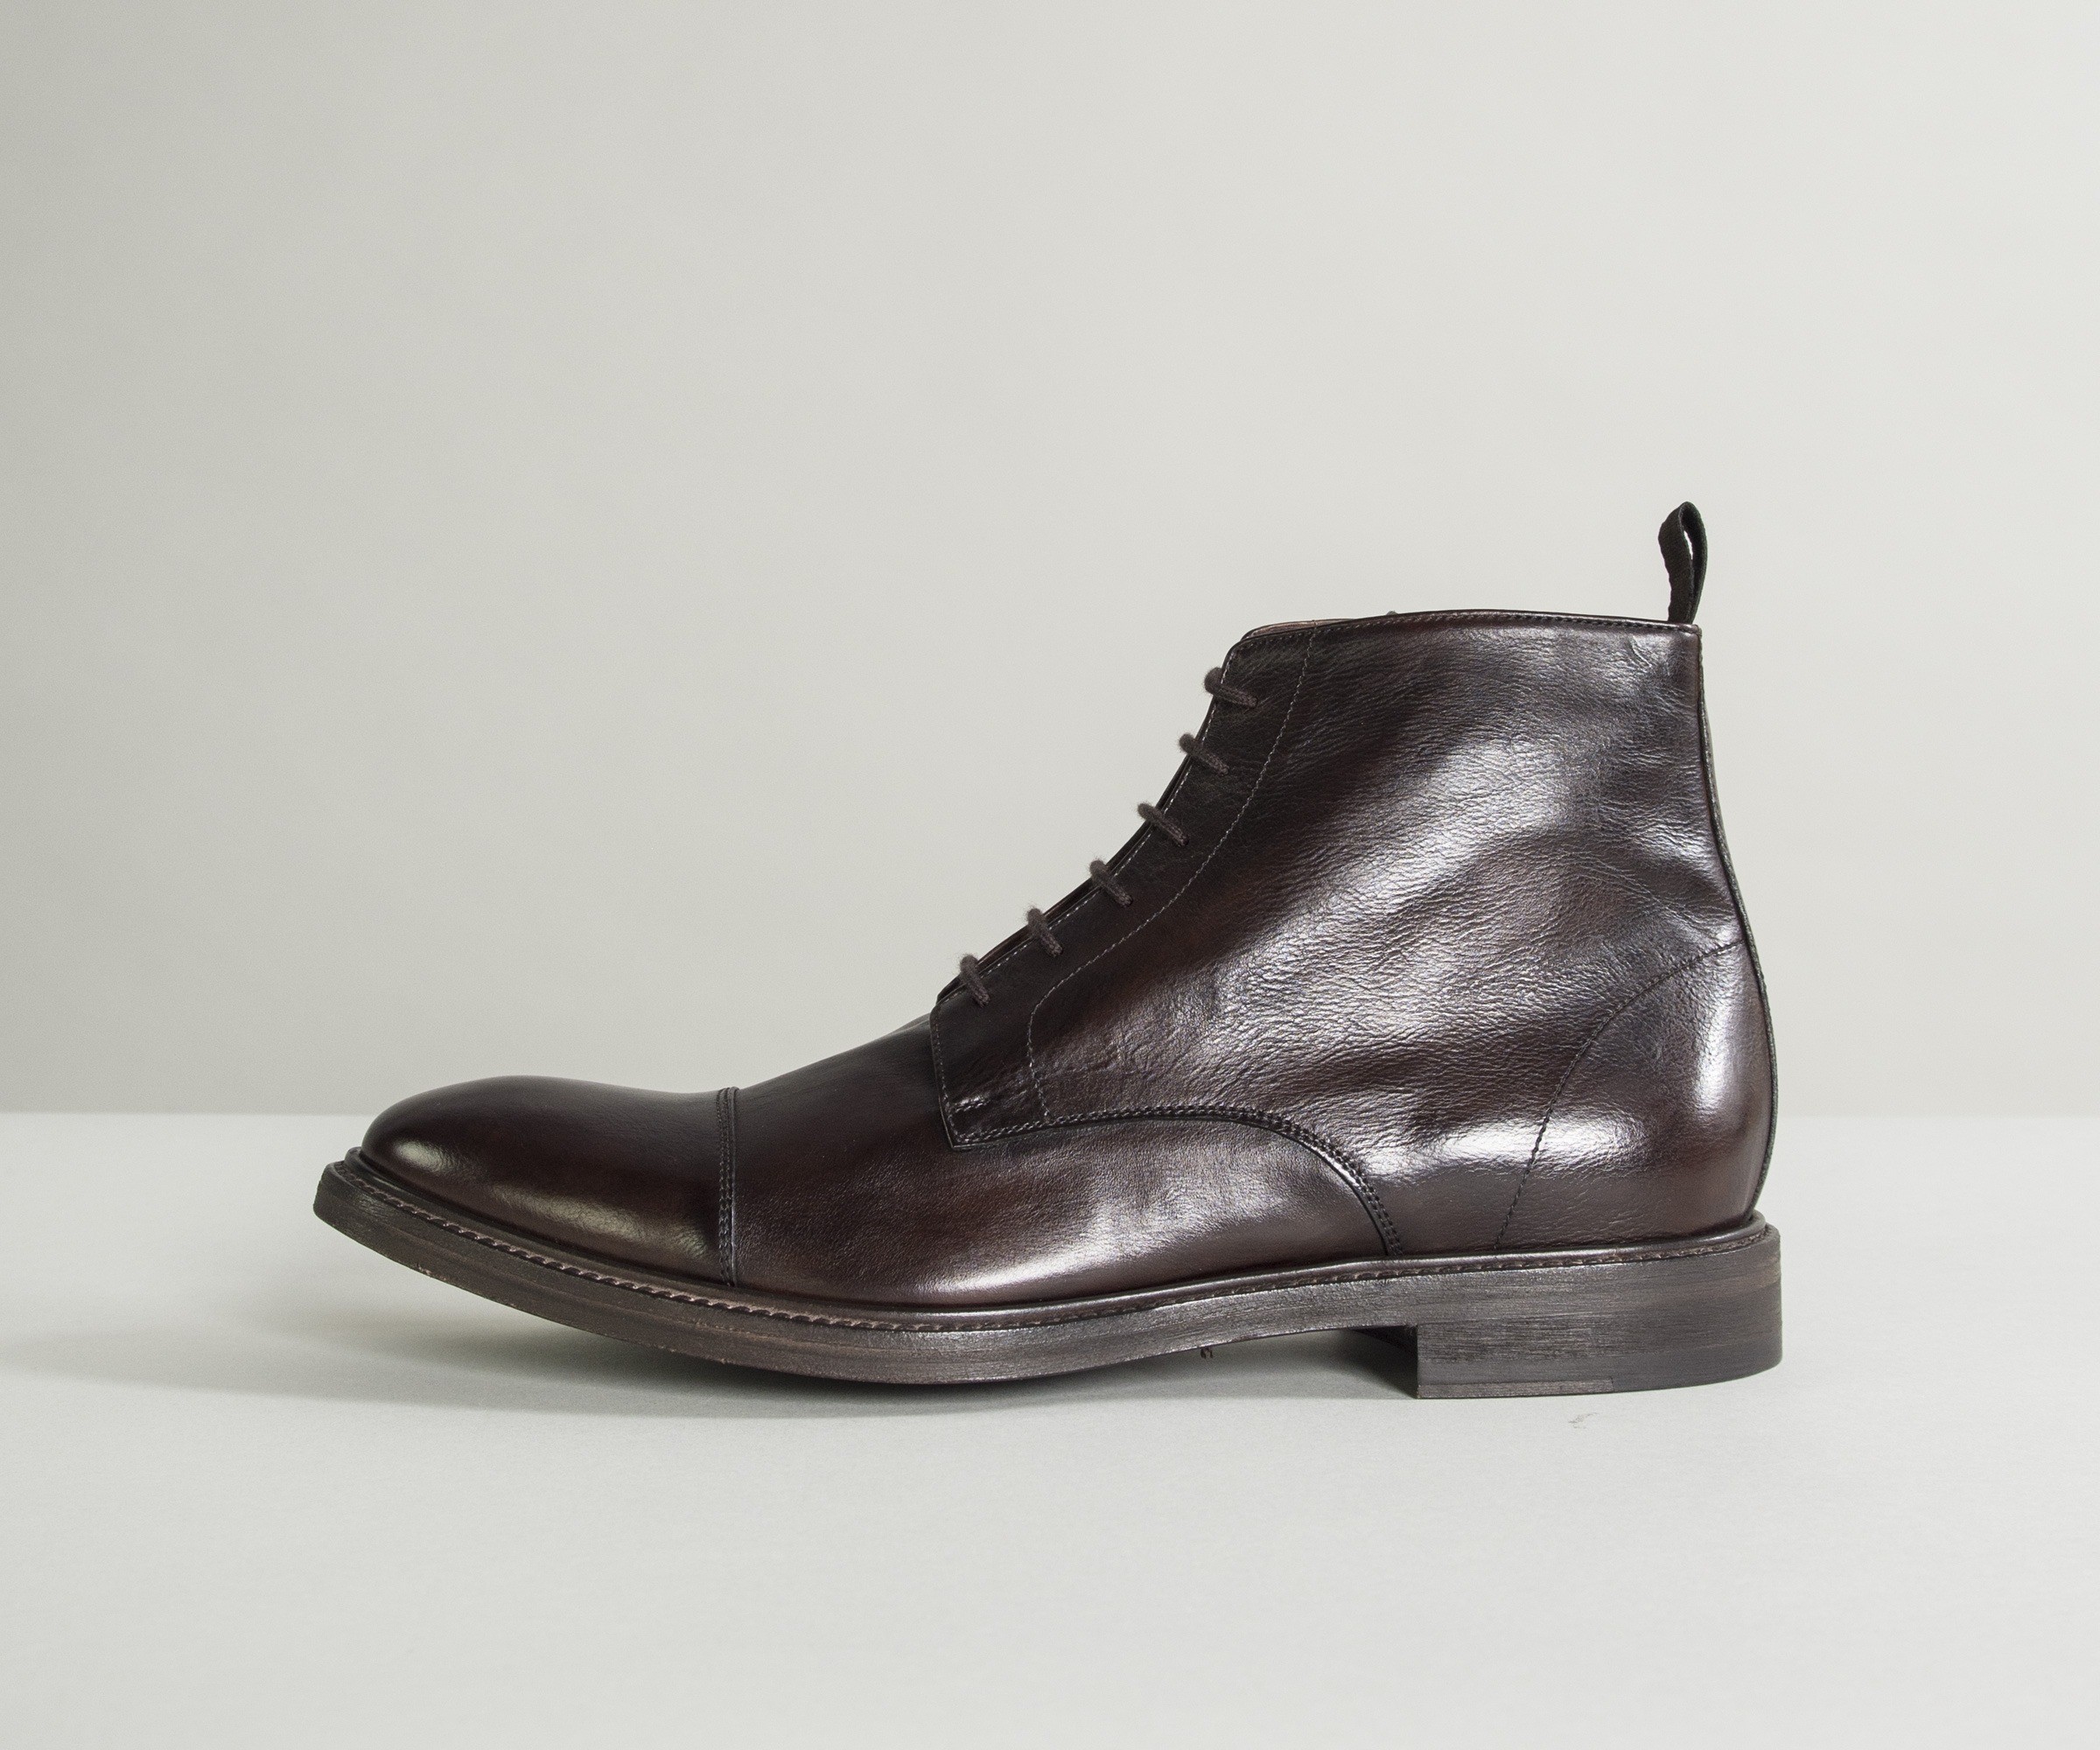 Paul Smith Shoes 'Jarman' Dip-Dyed Calf Leather Boot Dark Brown